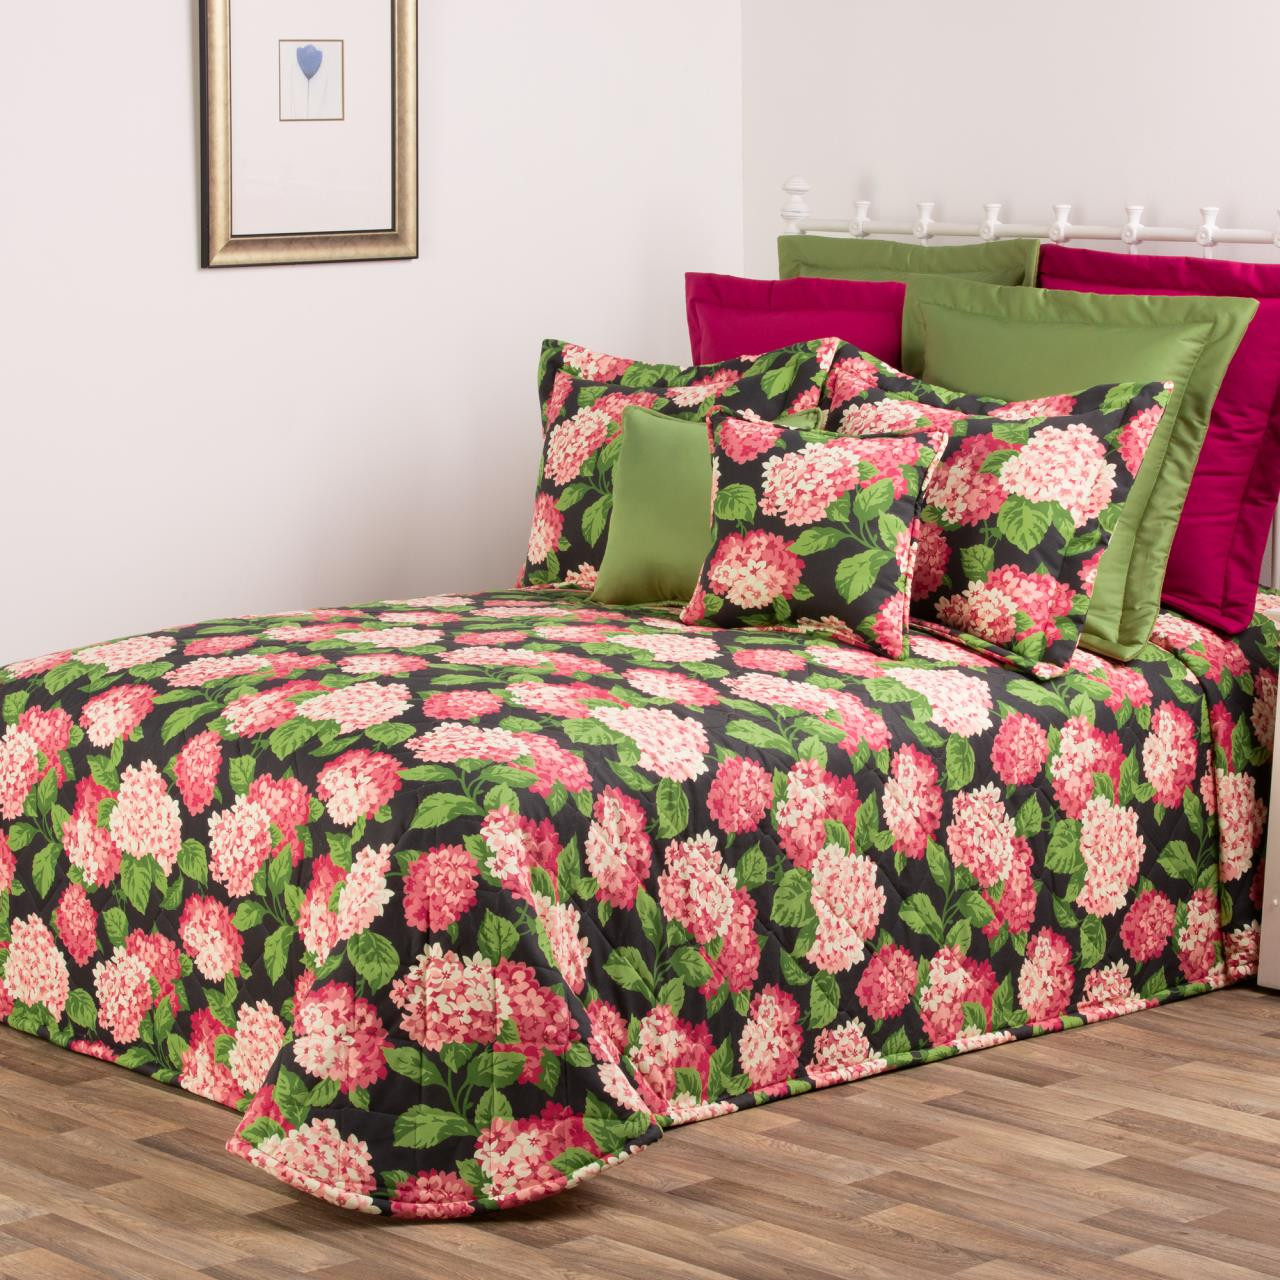 Summerwind Pink Tropical Bedding Collection -